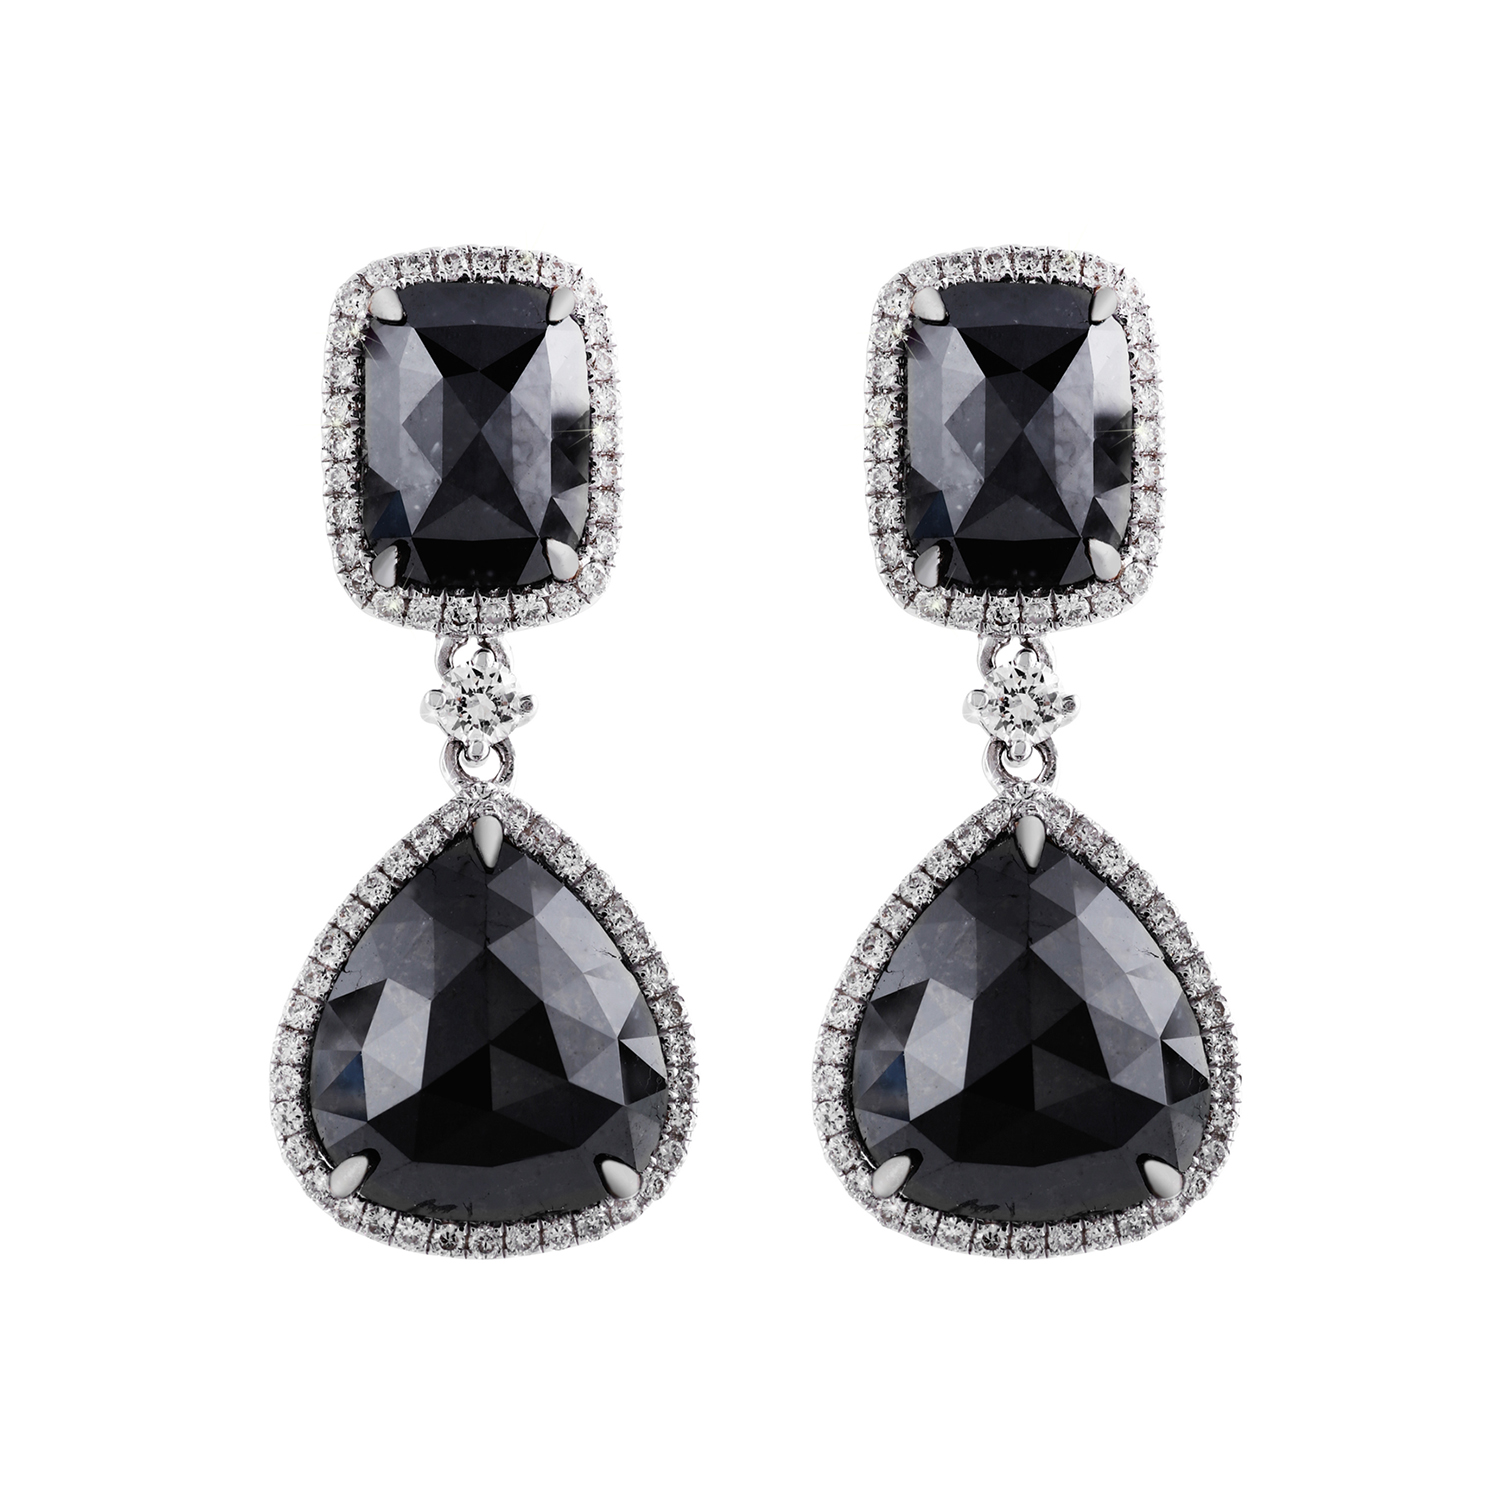 Exotic Gems » Product Categories » Earrings